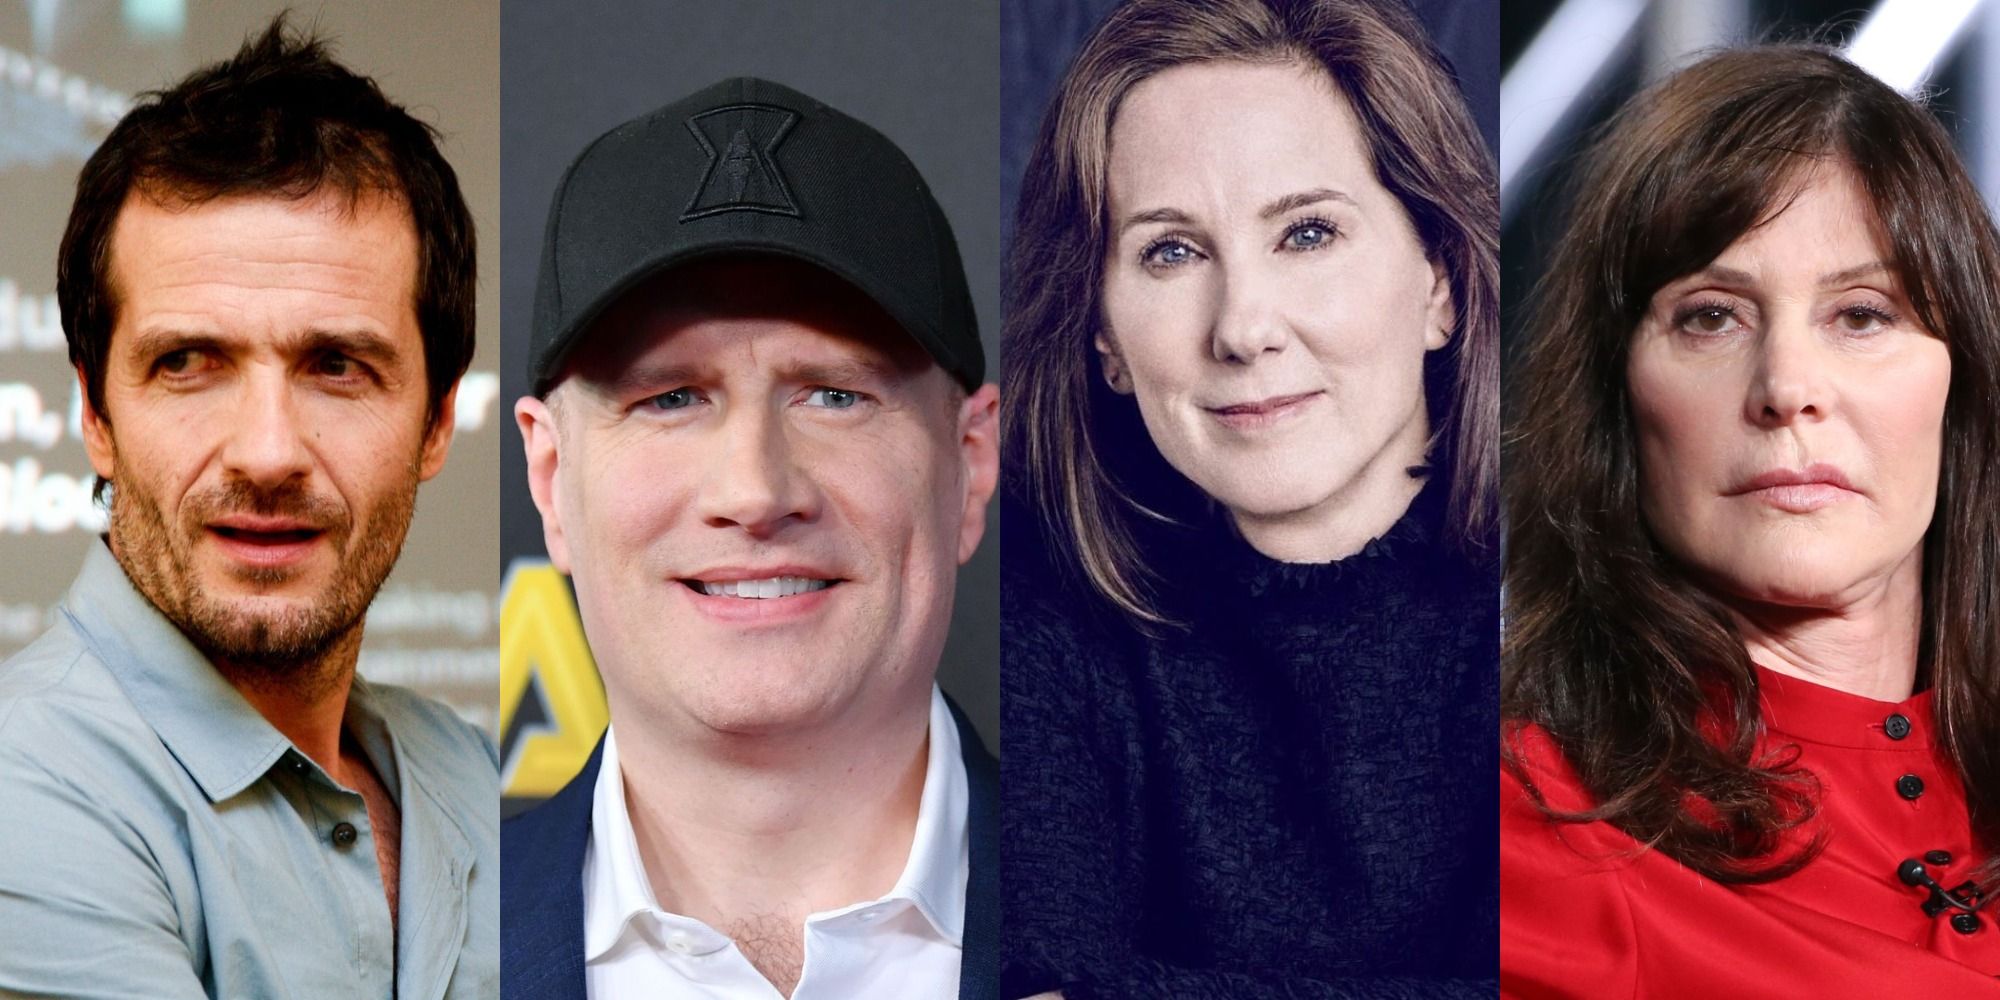 combined images of producers Kevin Feige, Kathleen Kennedy, David Heyman, and Lauren Shuler Donner